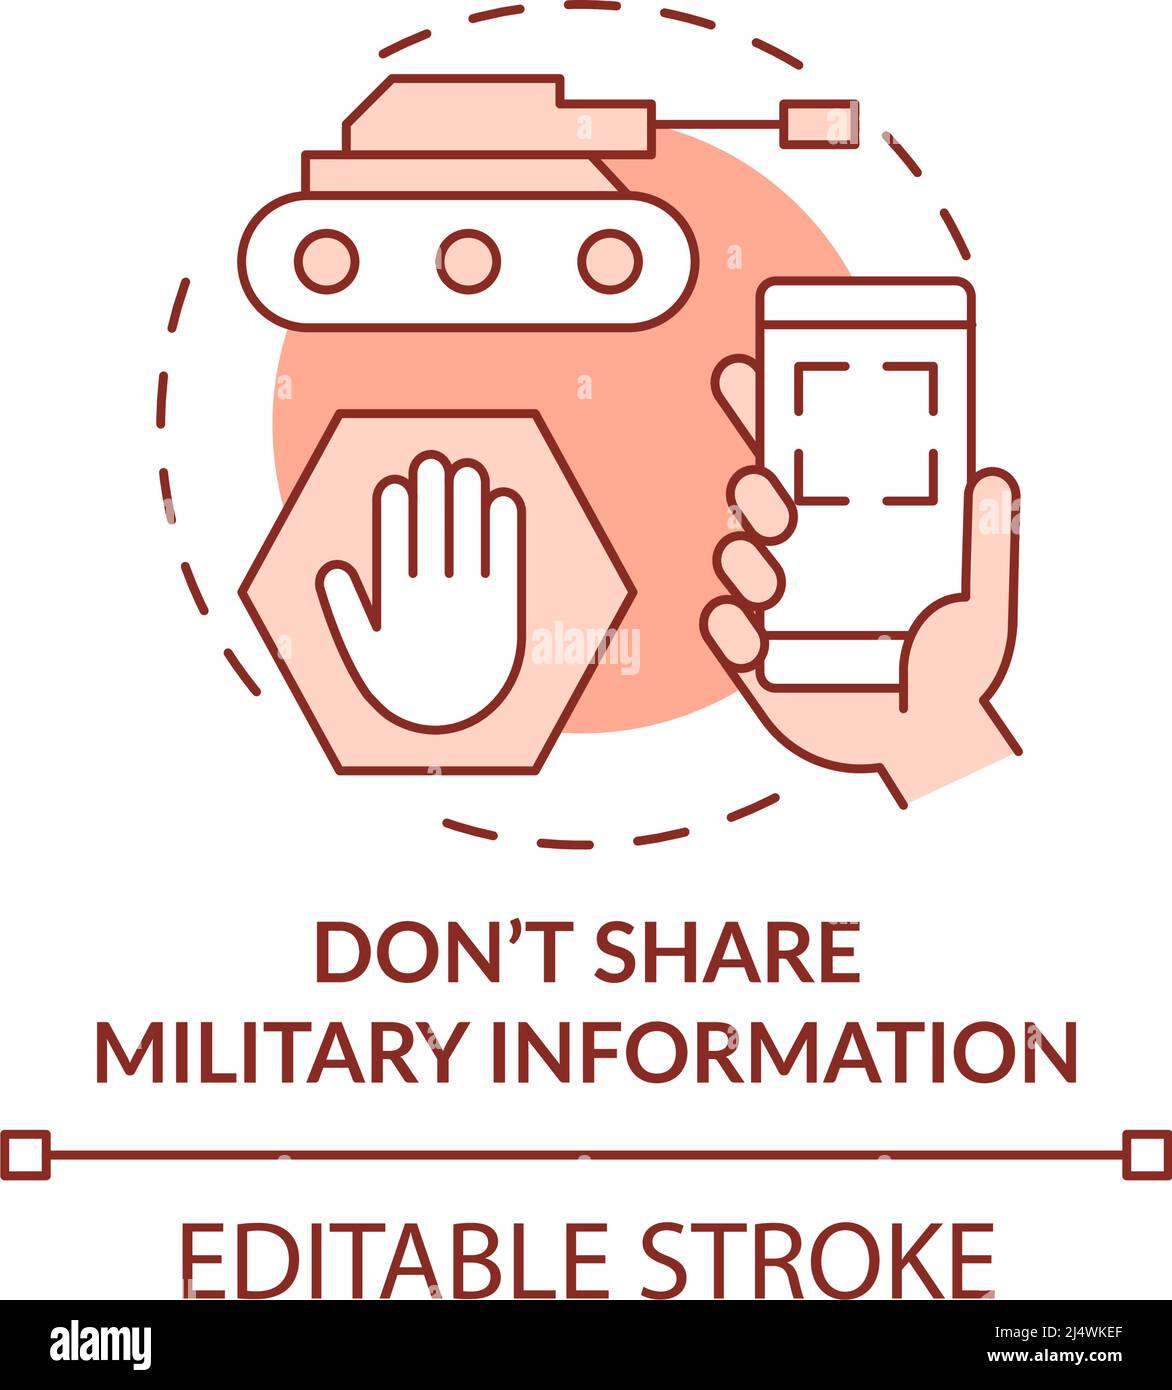 Dont share military information terracotta concept icon Stock Vector